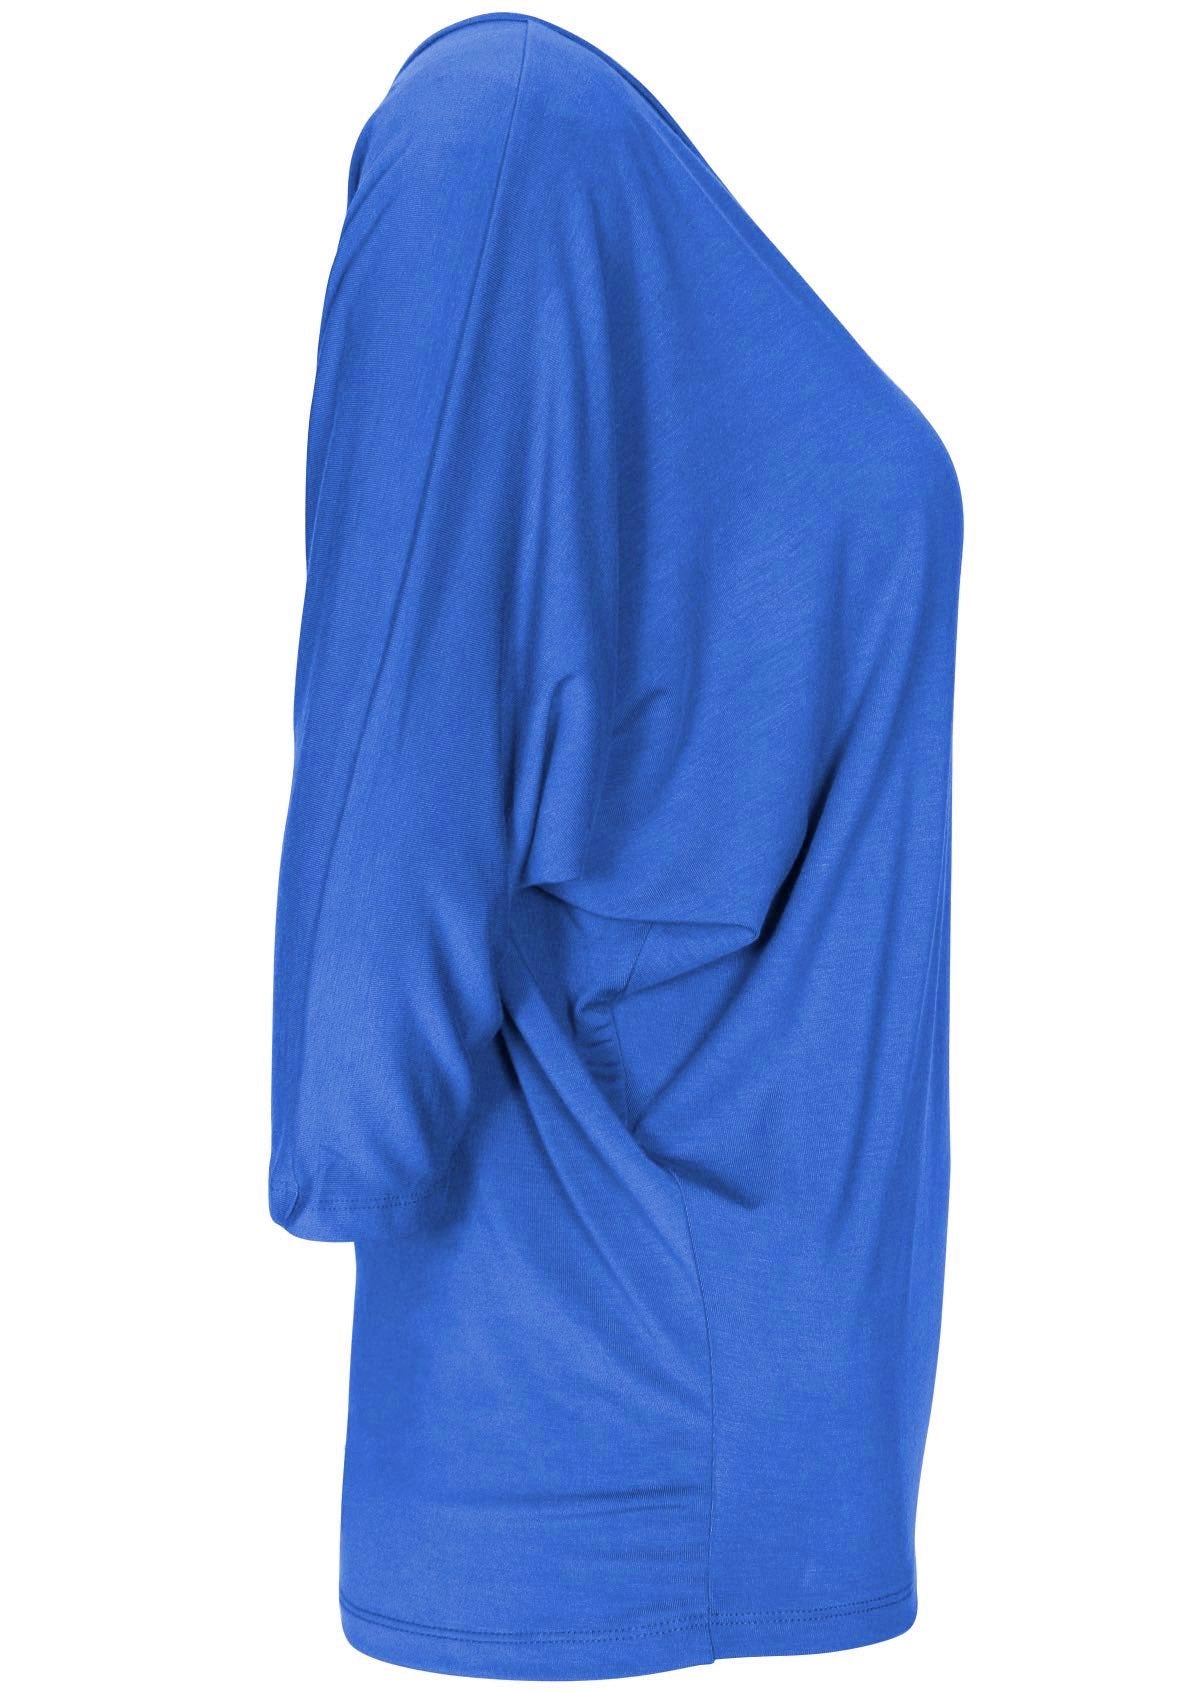 Side view of women's 3/4 sleeve rayon batwing v-neck blue top.